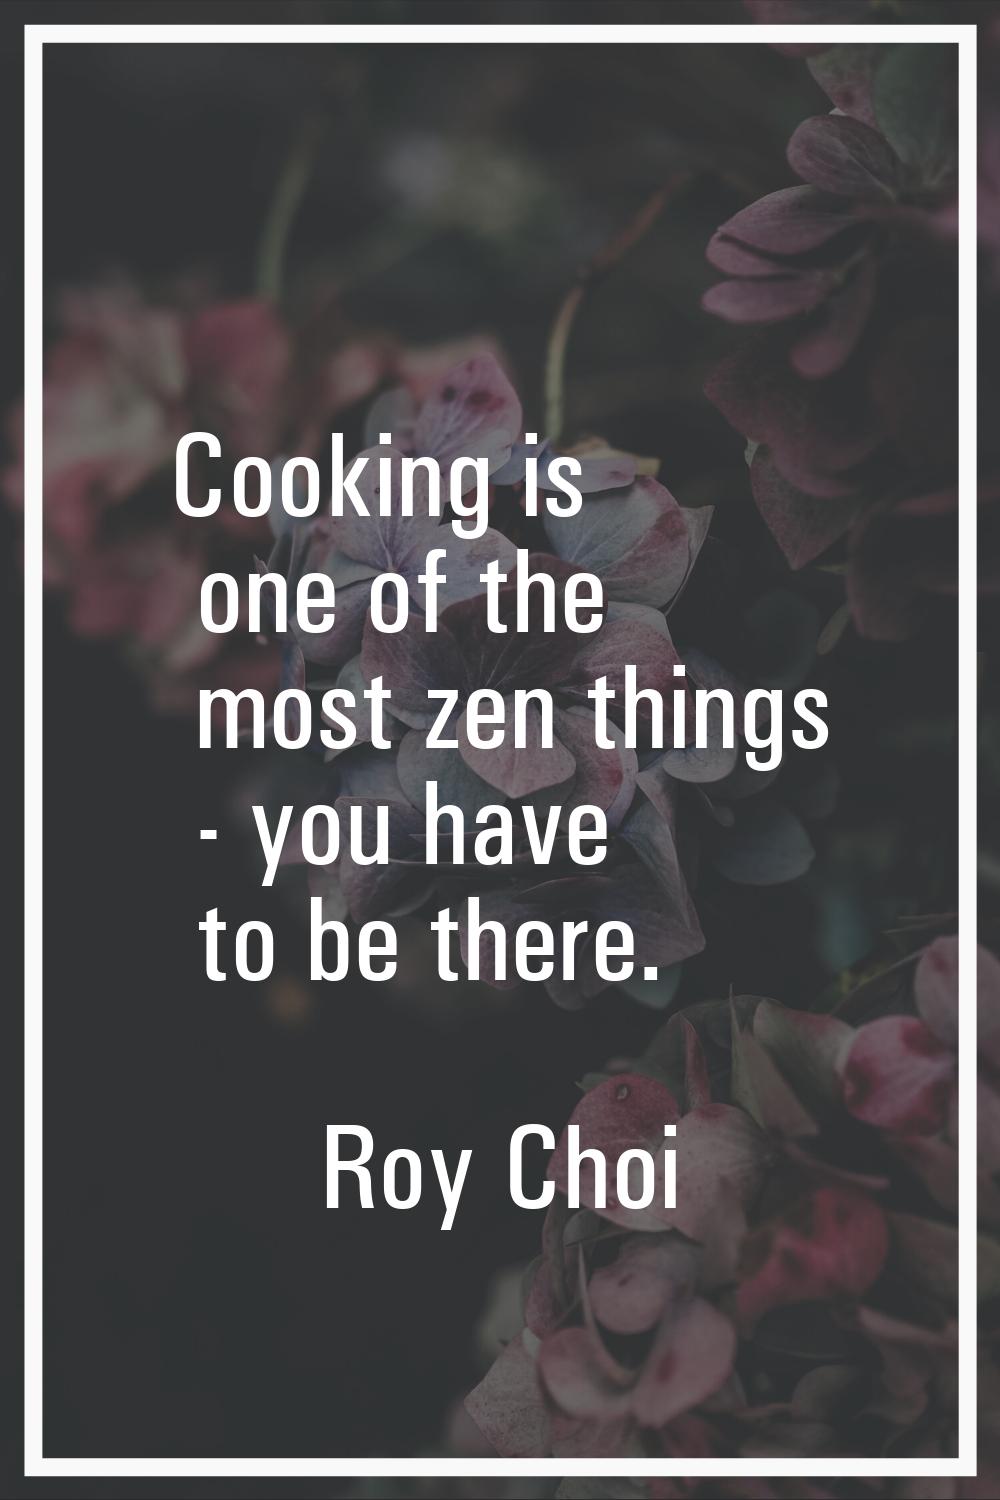 Cooking is one of the most zen things - you have to be there.